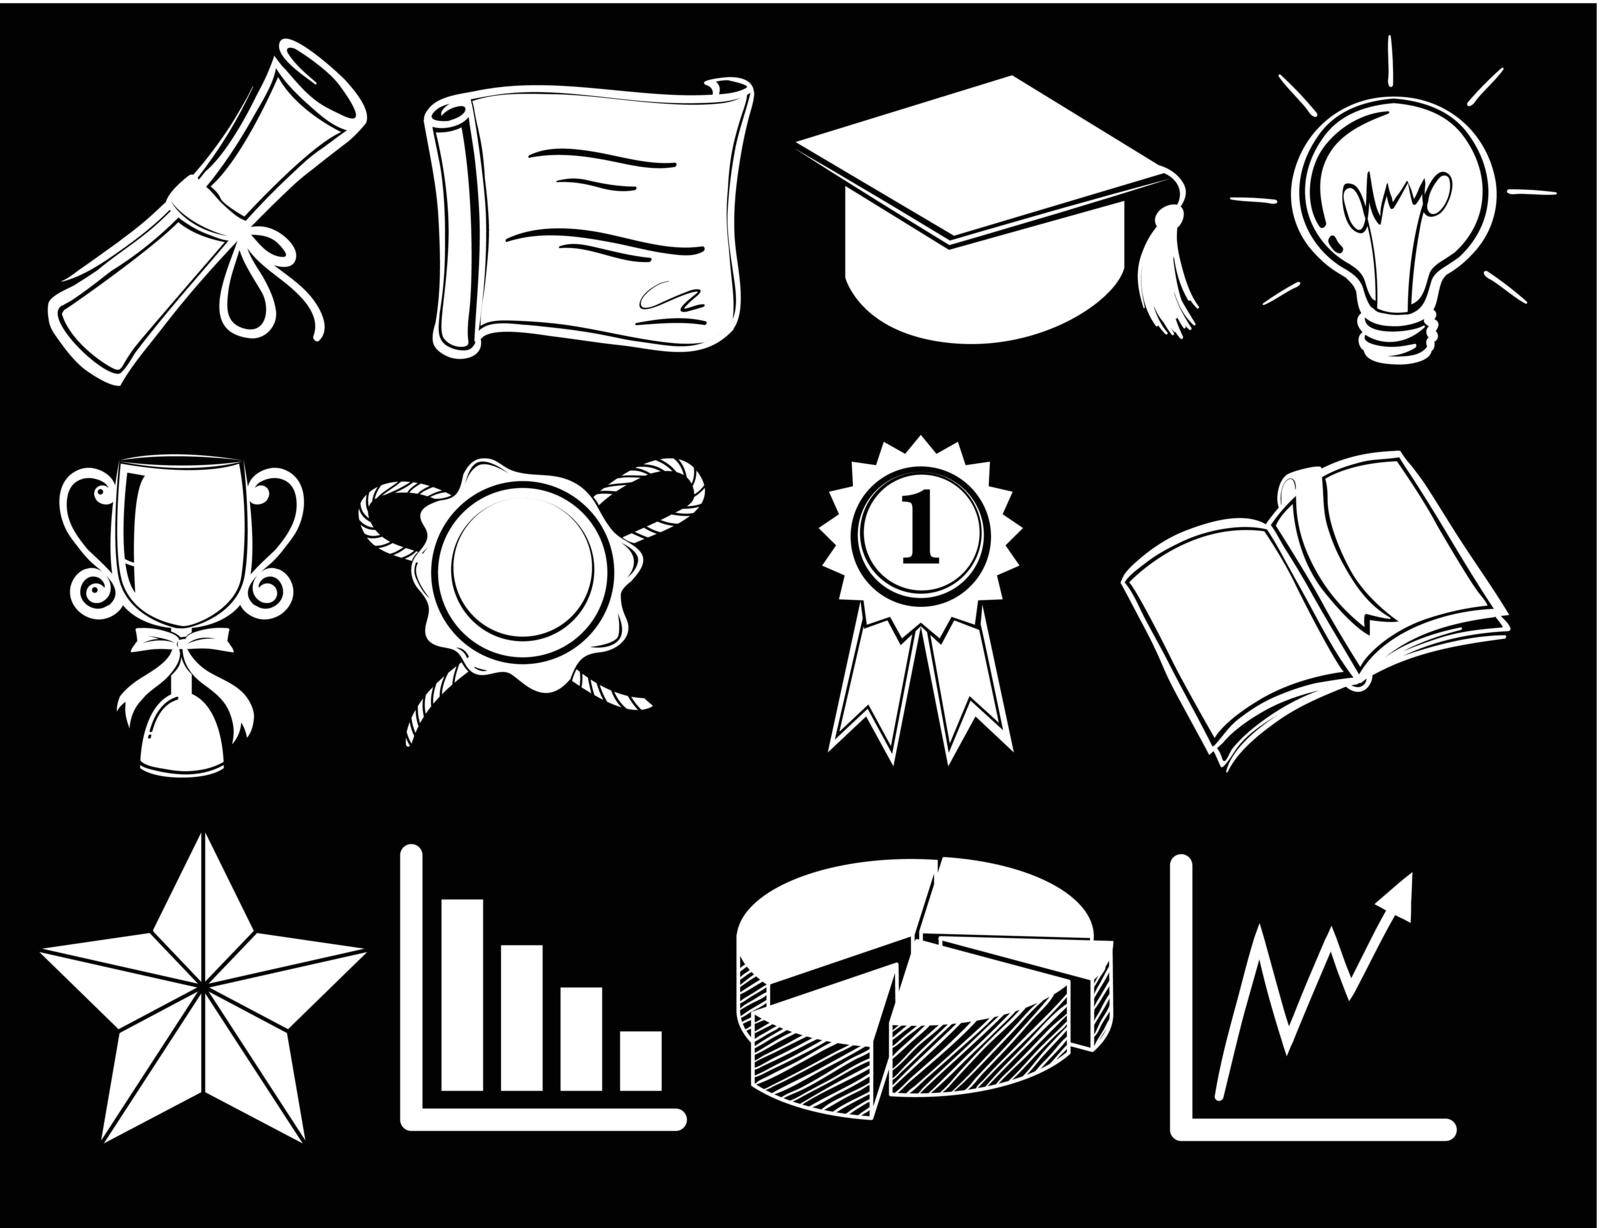 Illustration of the different things showing success on a black background